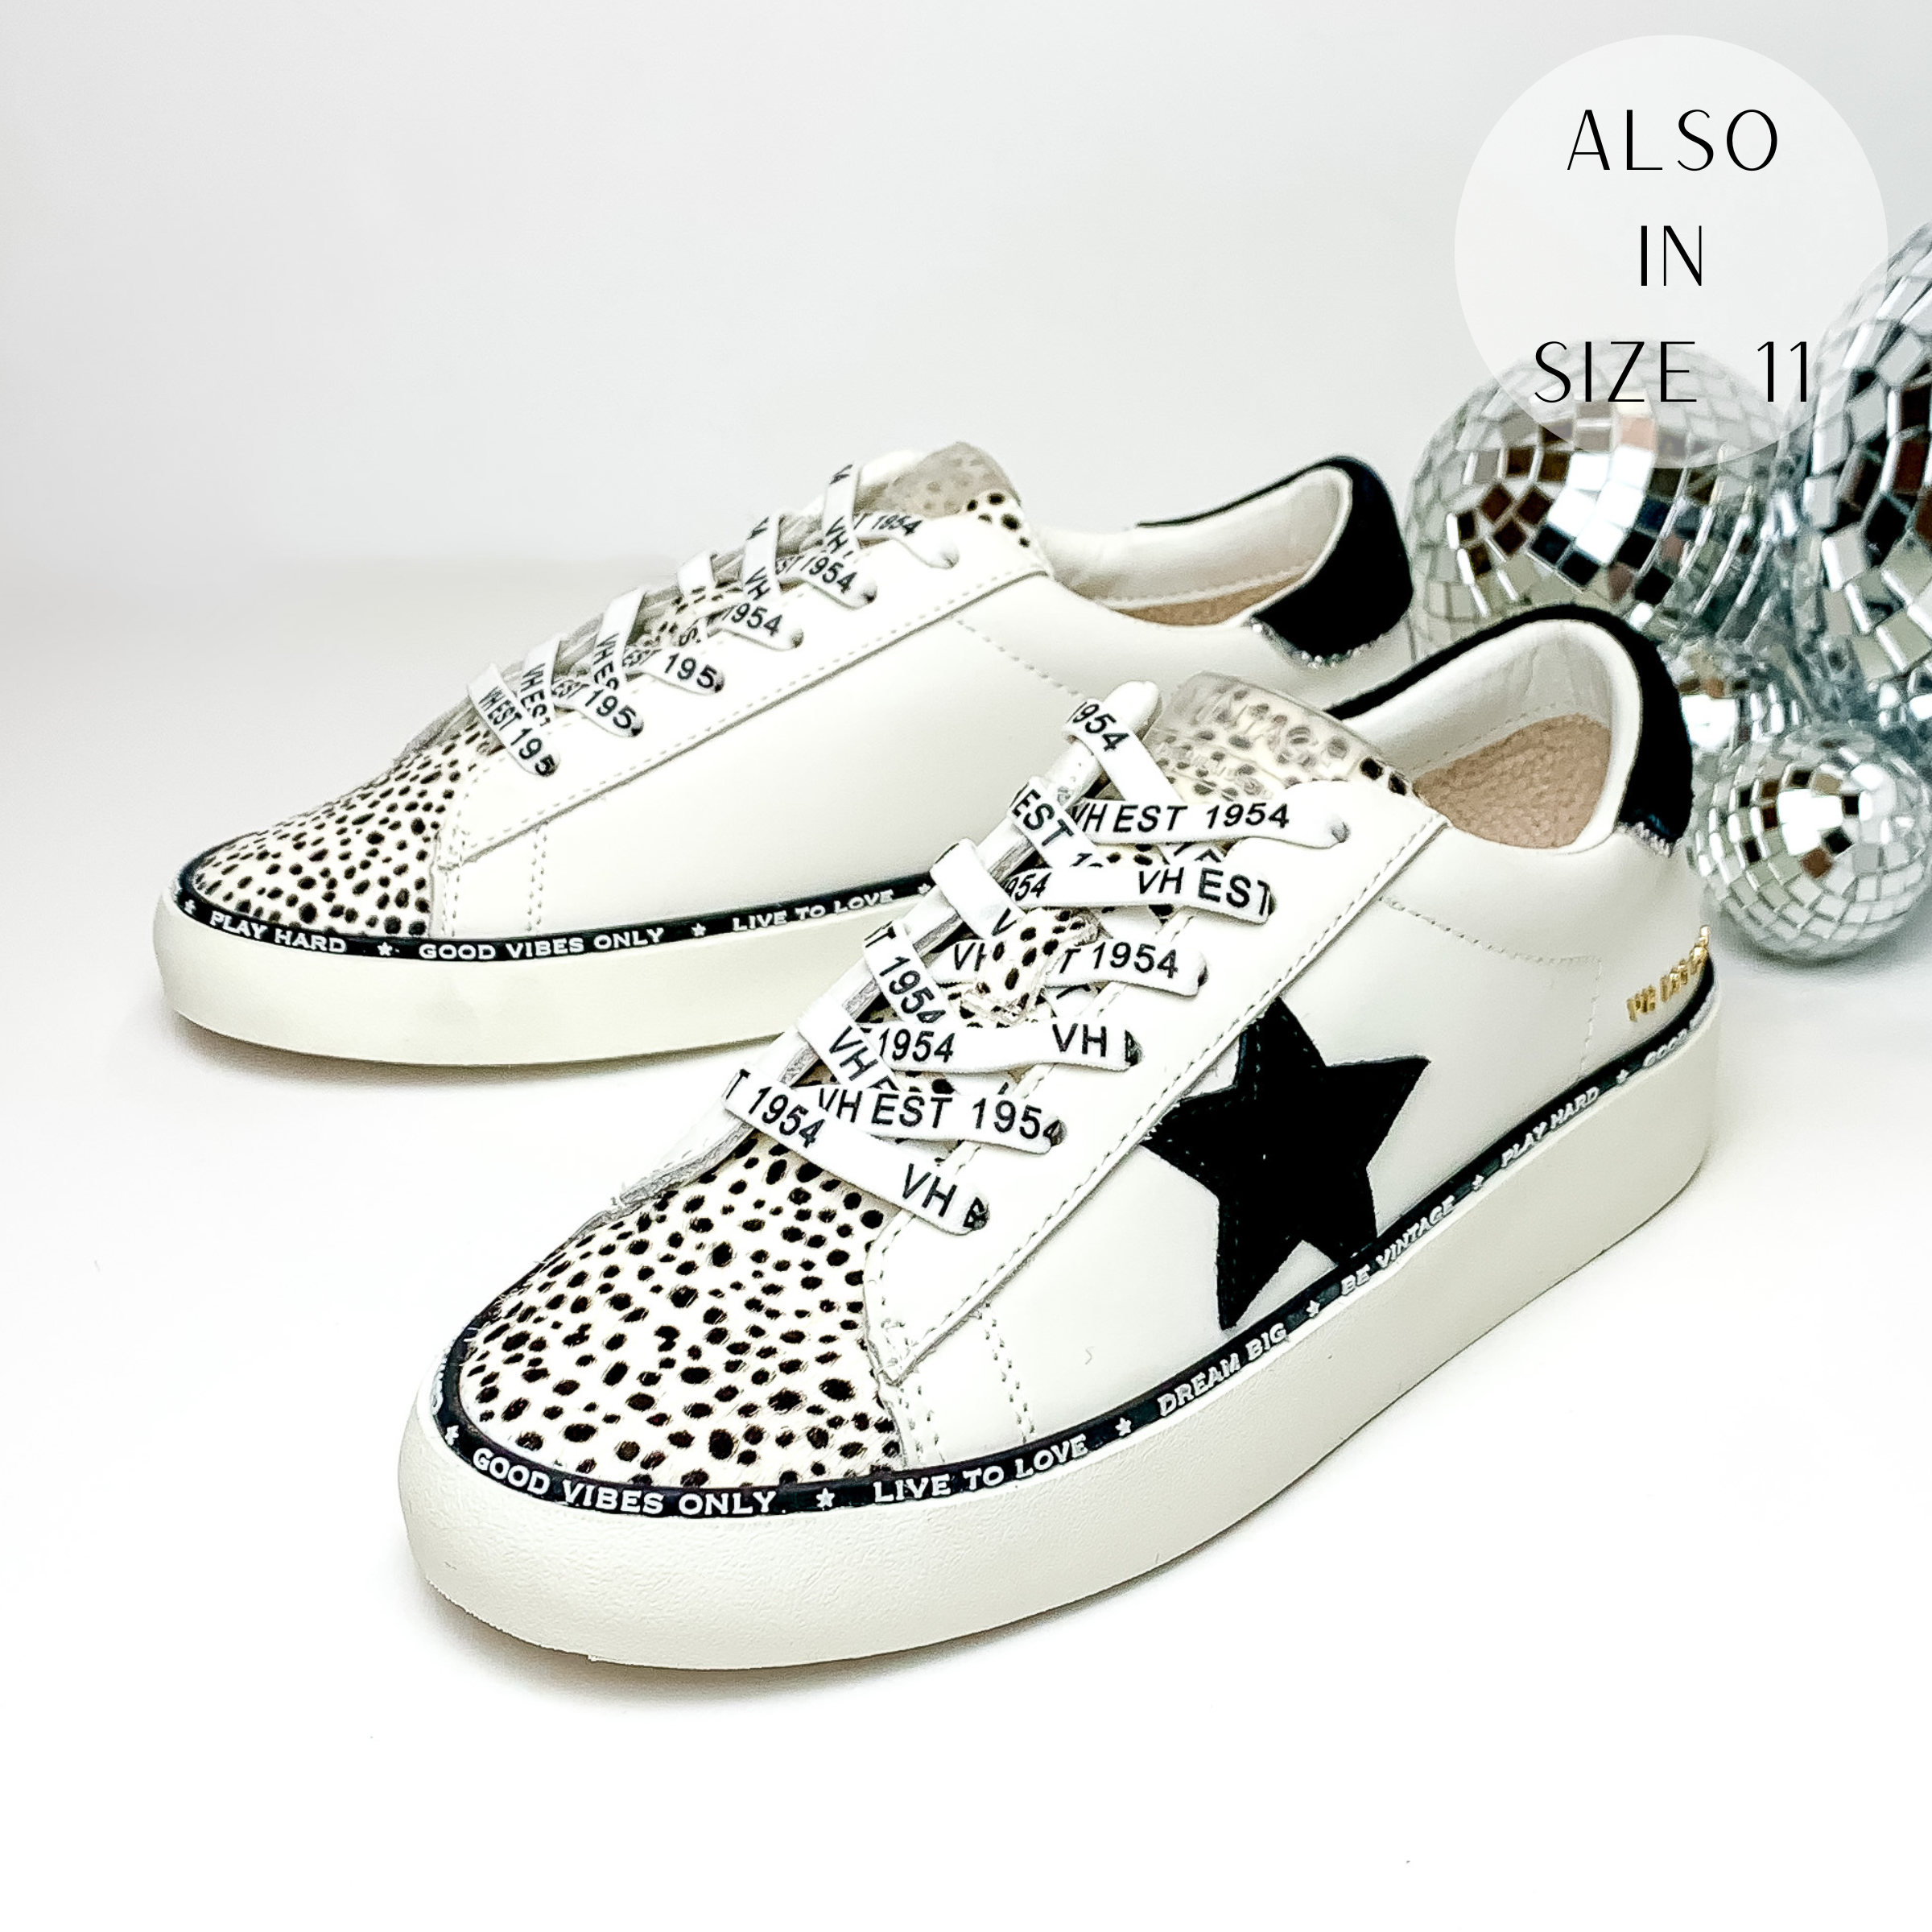 White tennis shoes with a black cheetah print on the tongue down to the toe and a black heel patch with a silver outline. These shoes also include a black rubber outline of the shoe that has positive phrases on it and they have a black star emblem on the side of the shoe. These shoes are pictured on a white background with disco balls behind them on the right hand side.